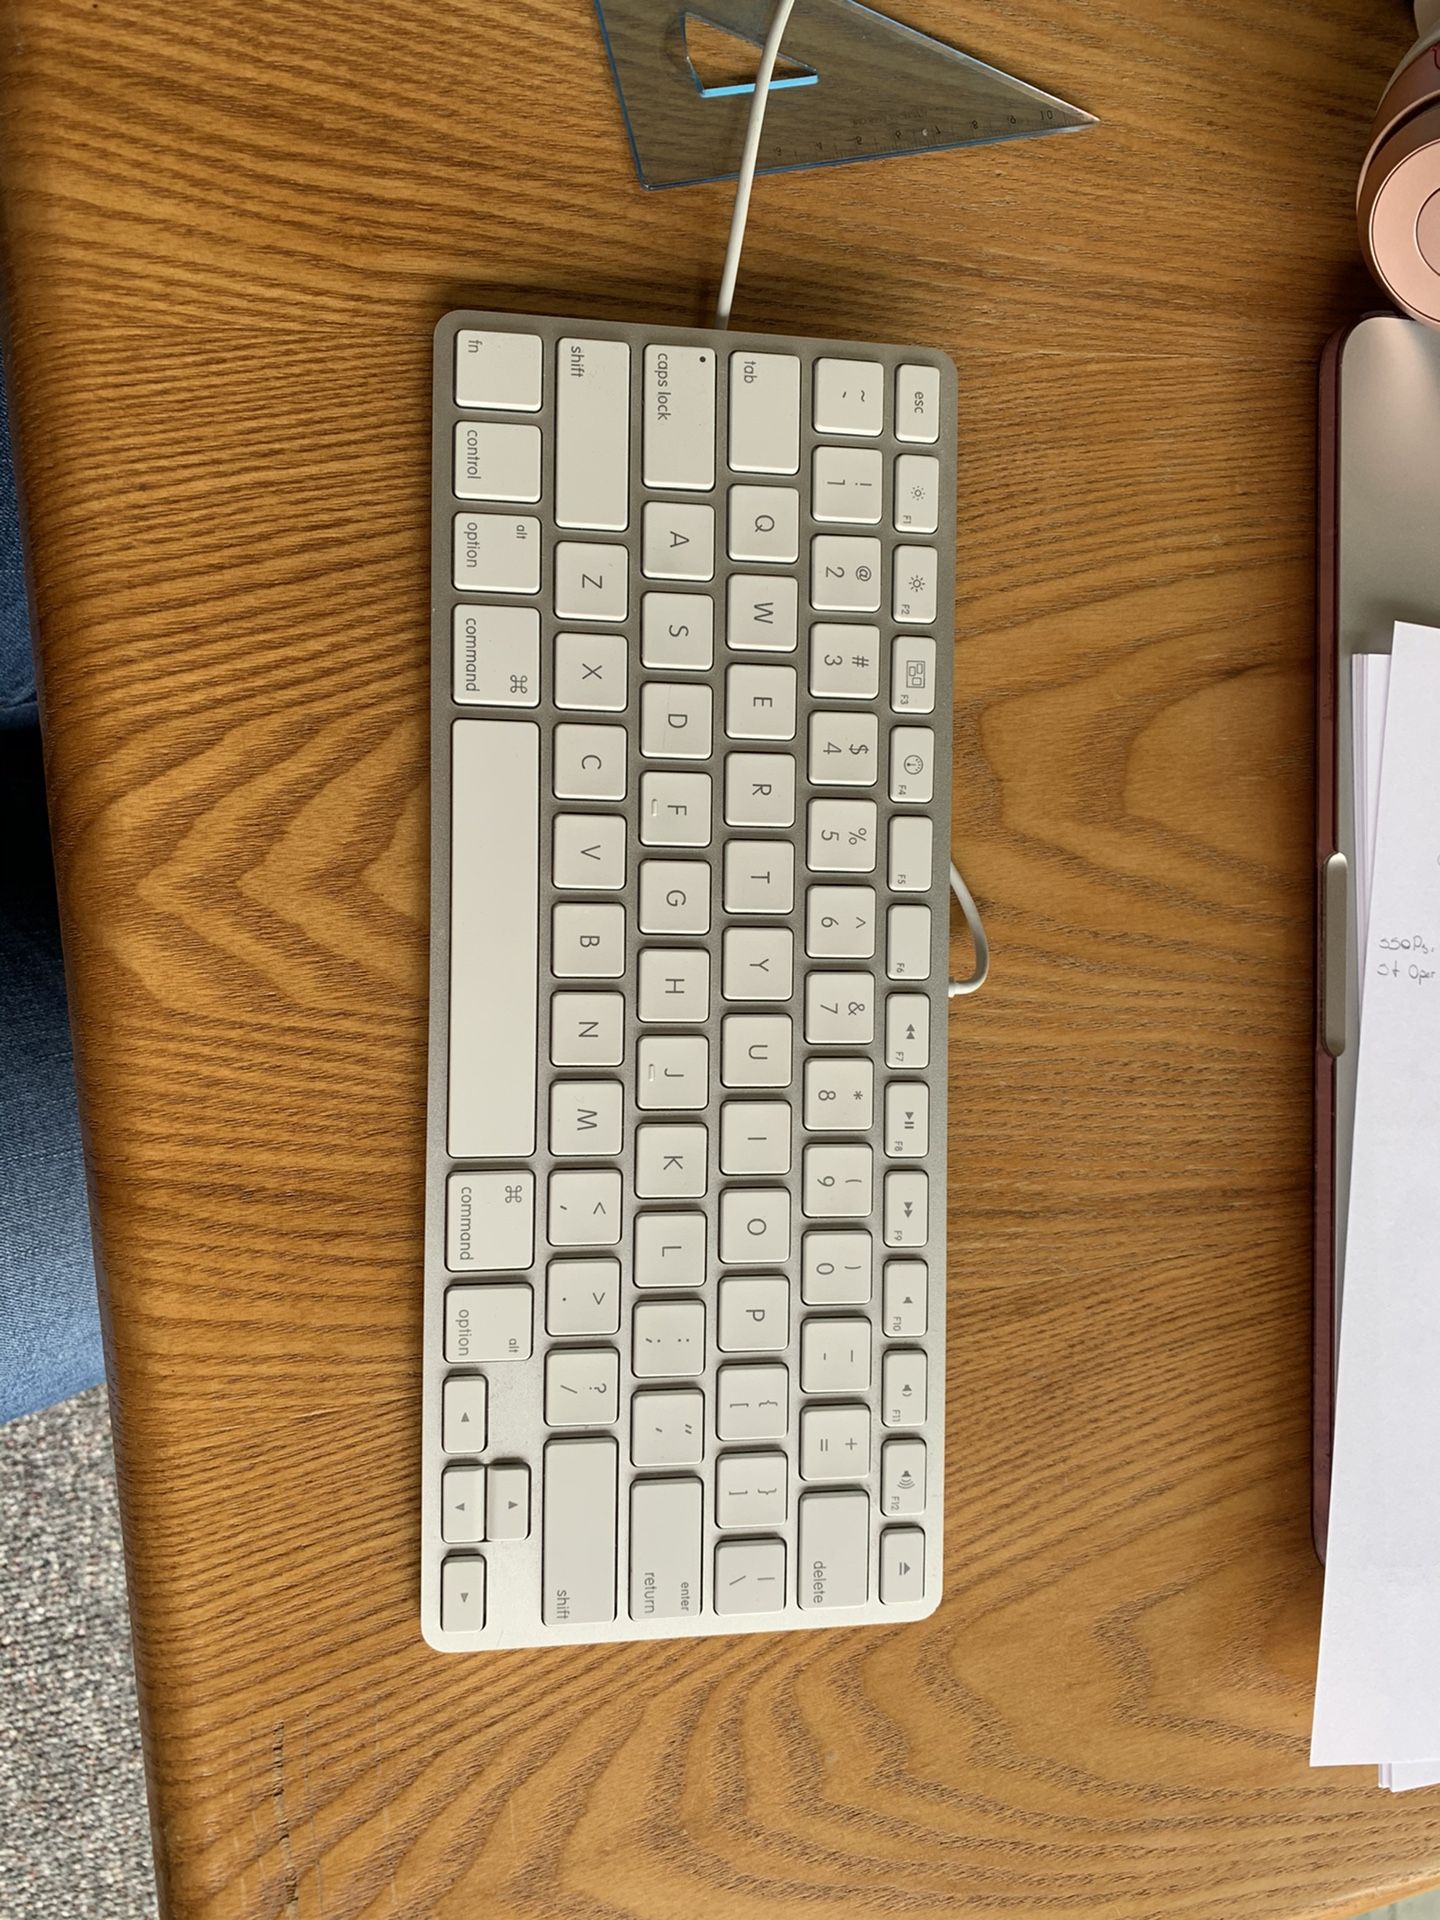 Apple A1242 wired compact keyboard